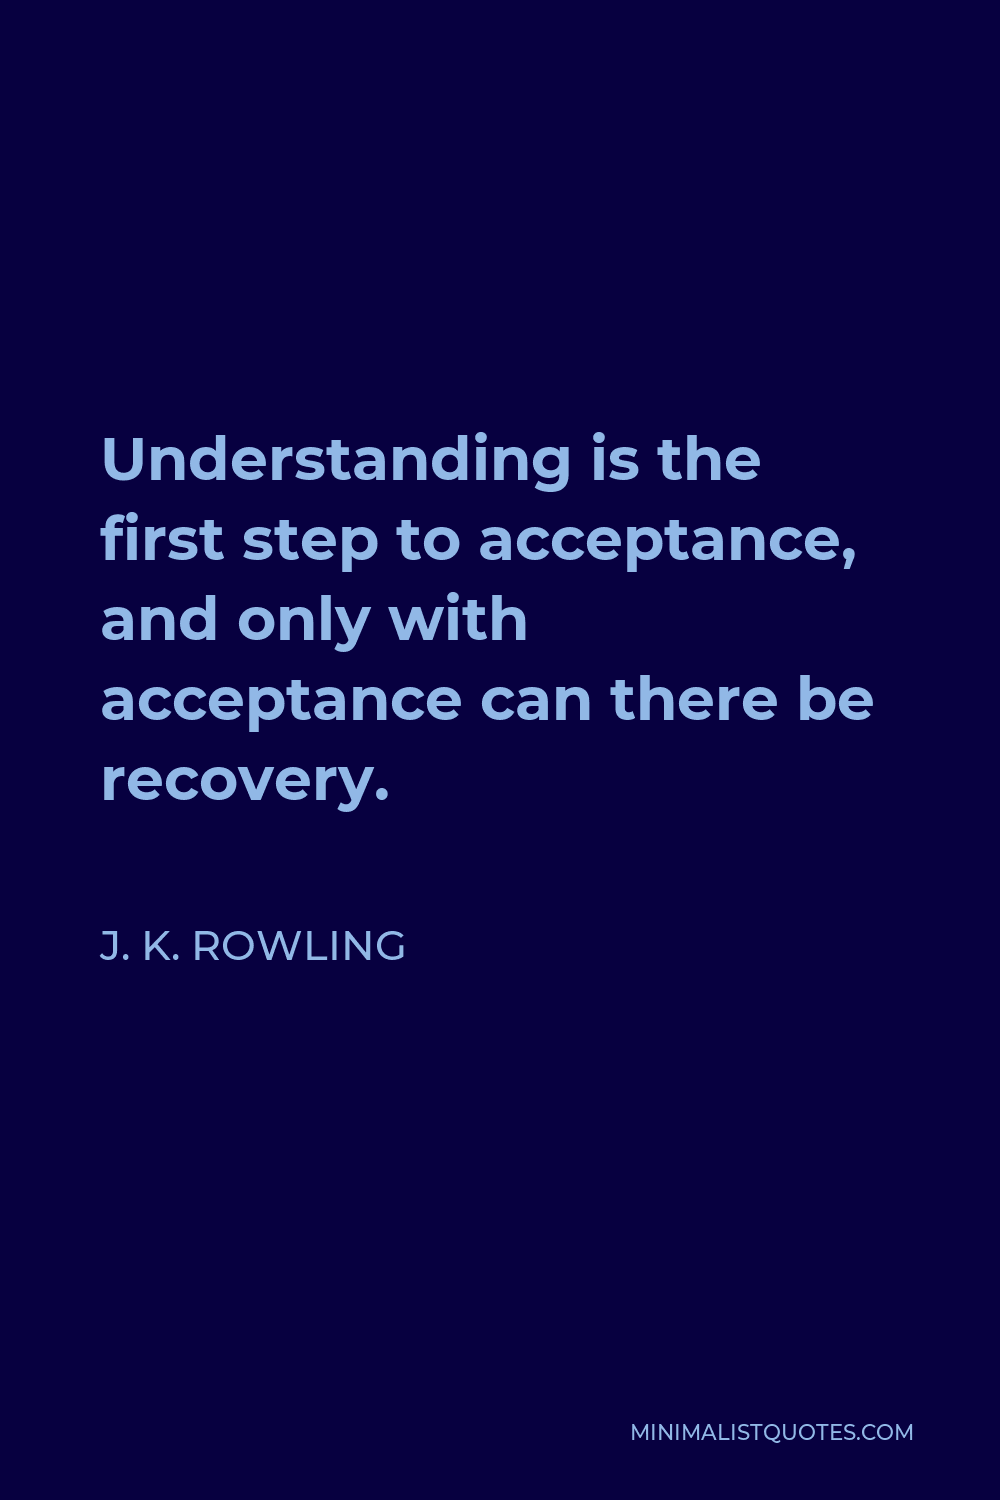 J. K. Rowling Quote: Understanding is the first step to acceptance, and ...